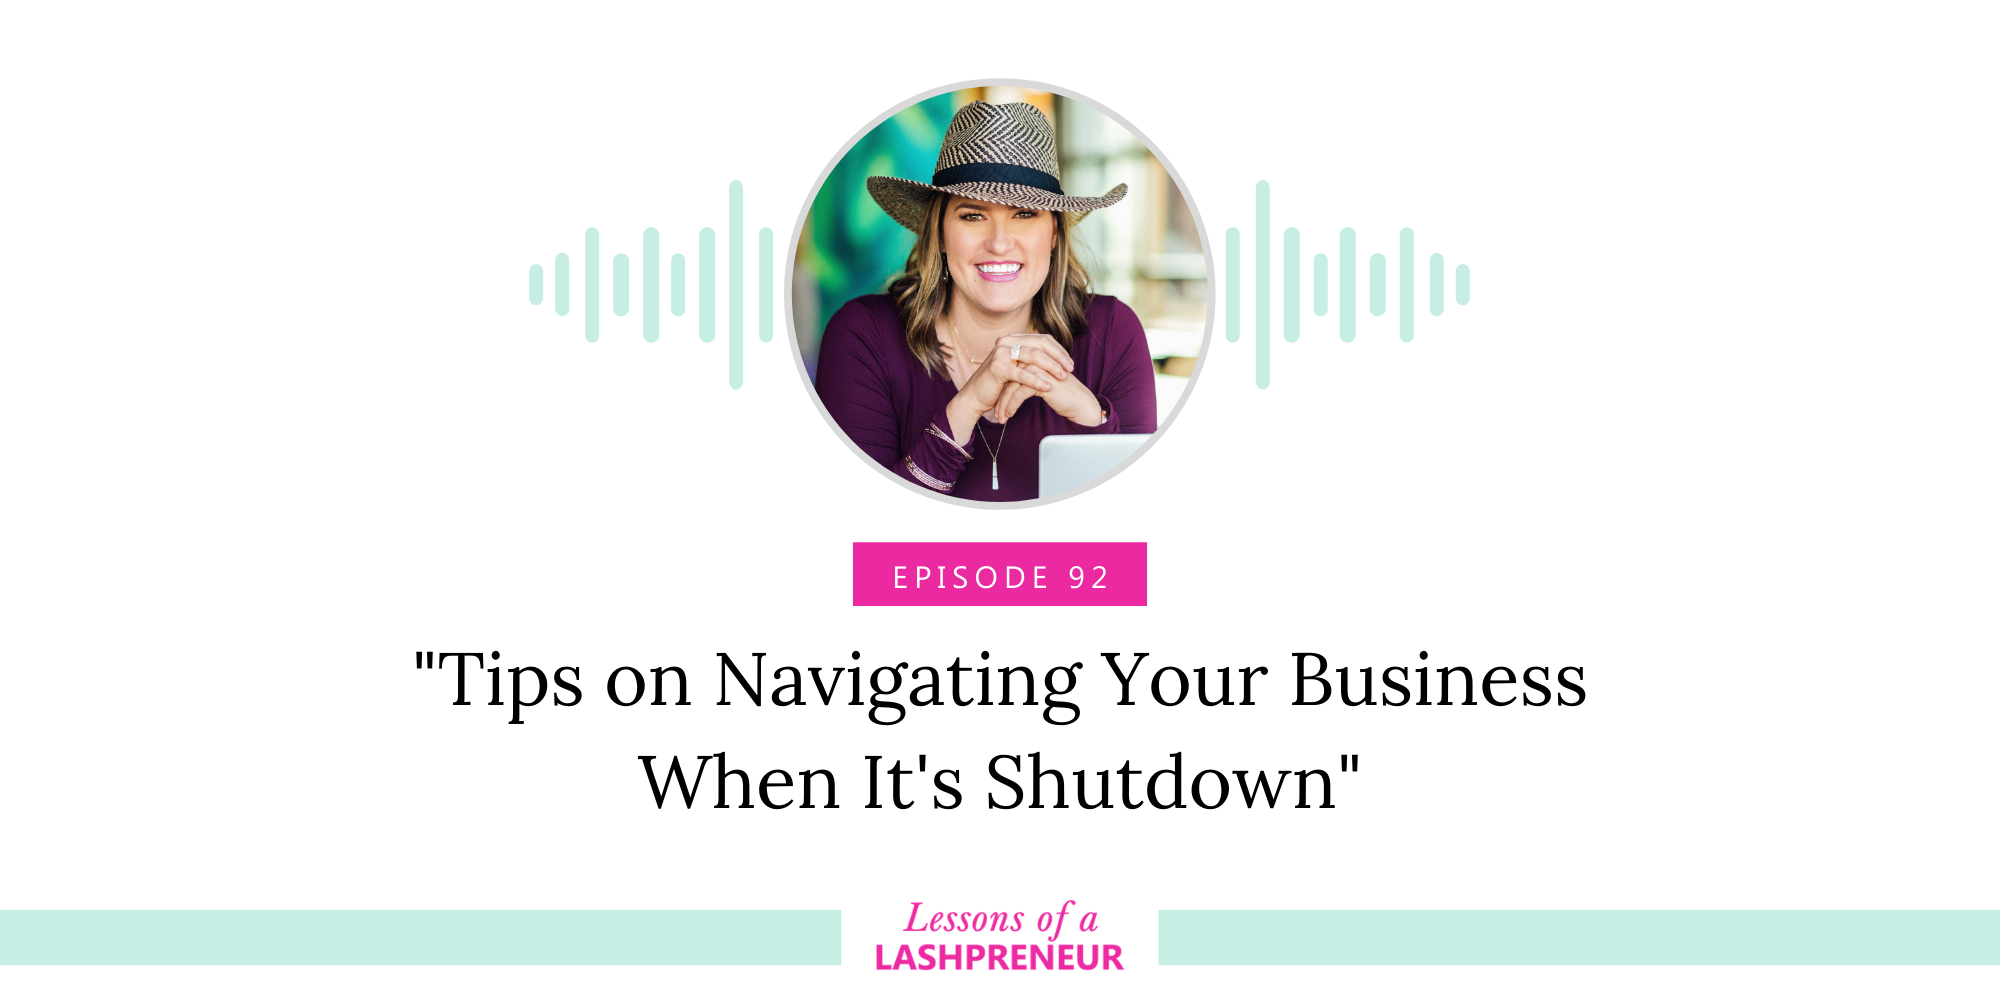 Tips on Navigating Your Business When It’s Shutdown